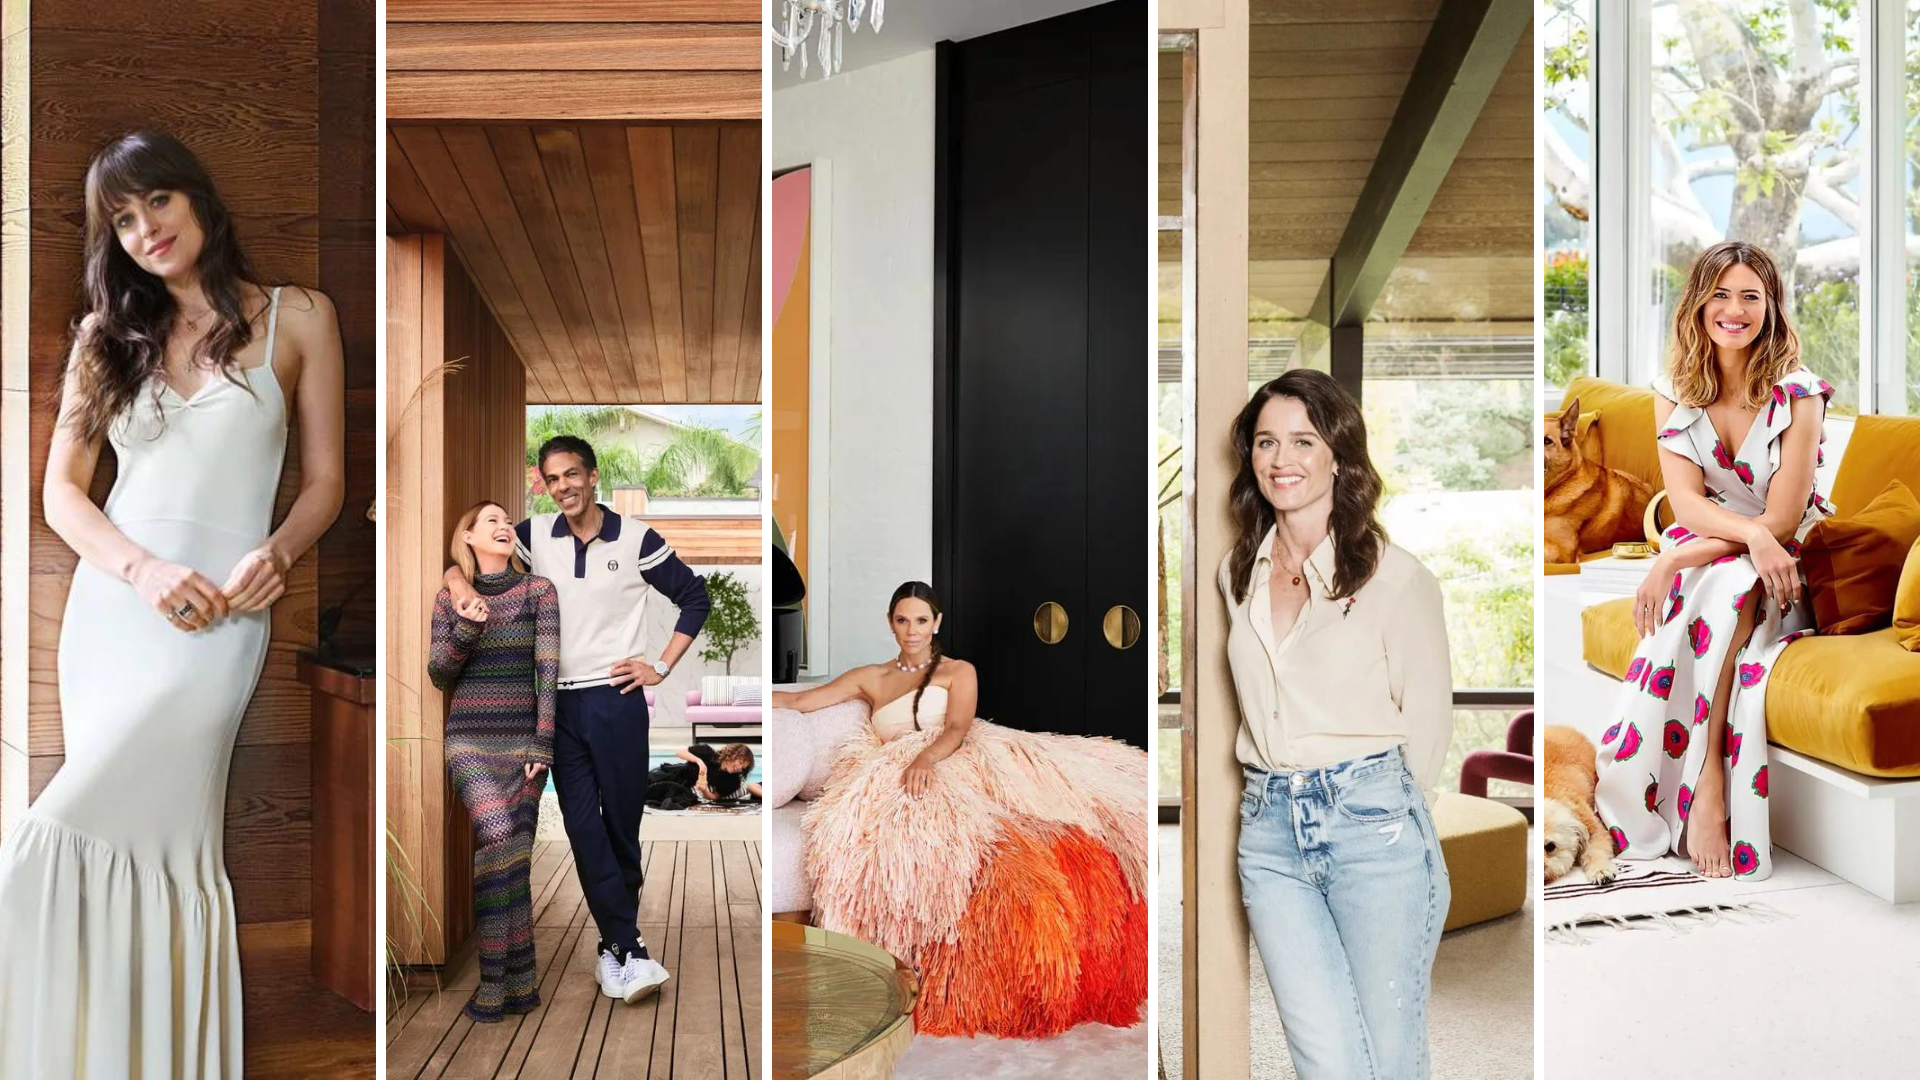 The 5 Best Mid-Century Modern Homes by Celebrities